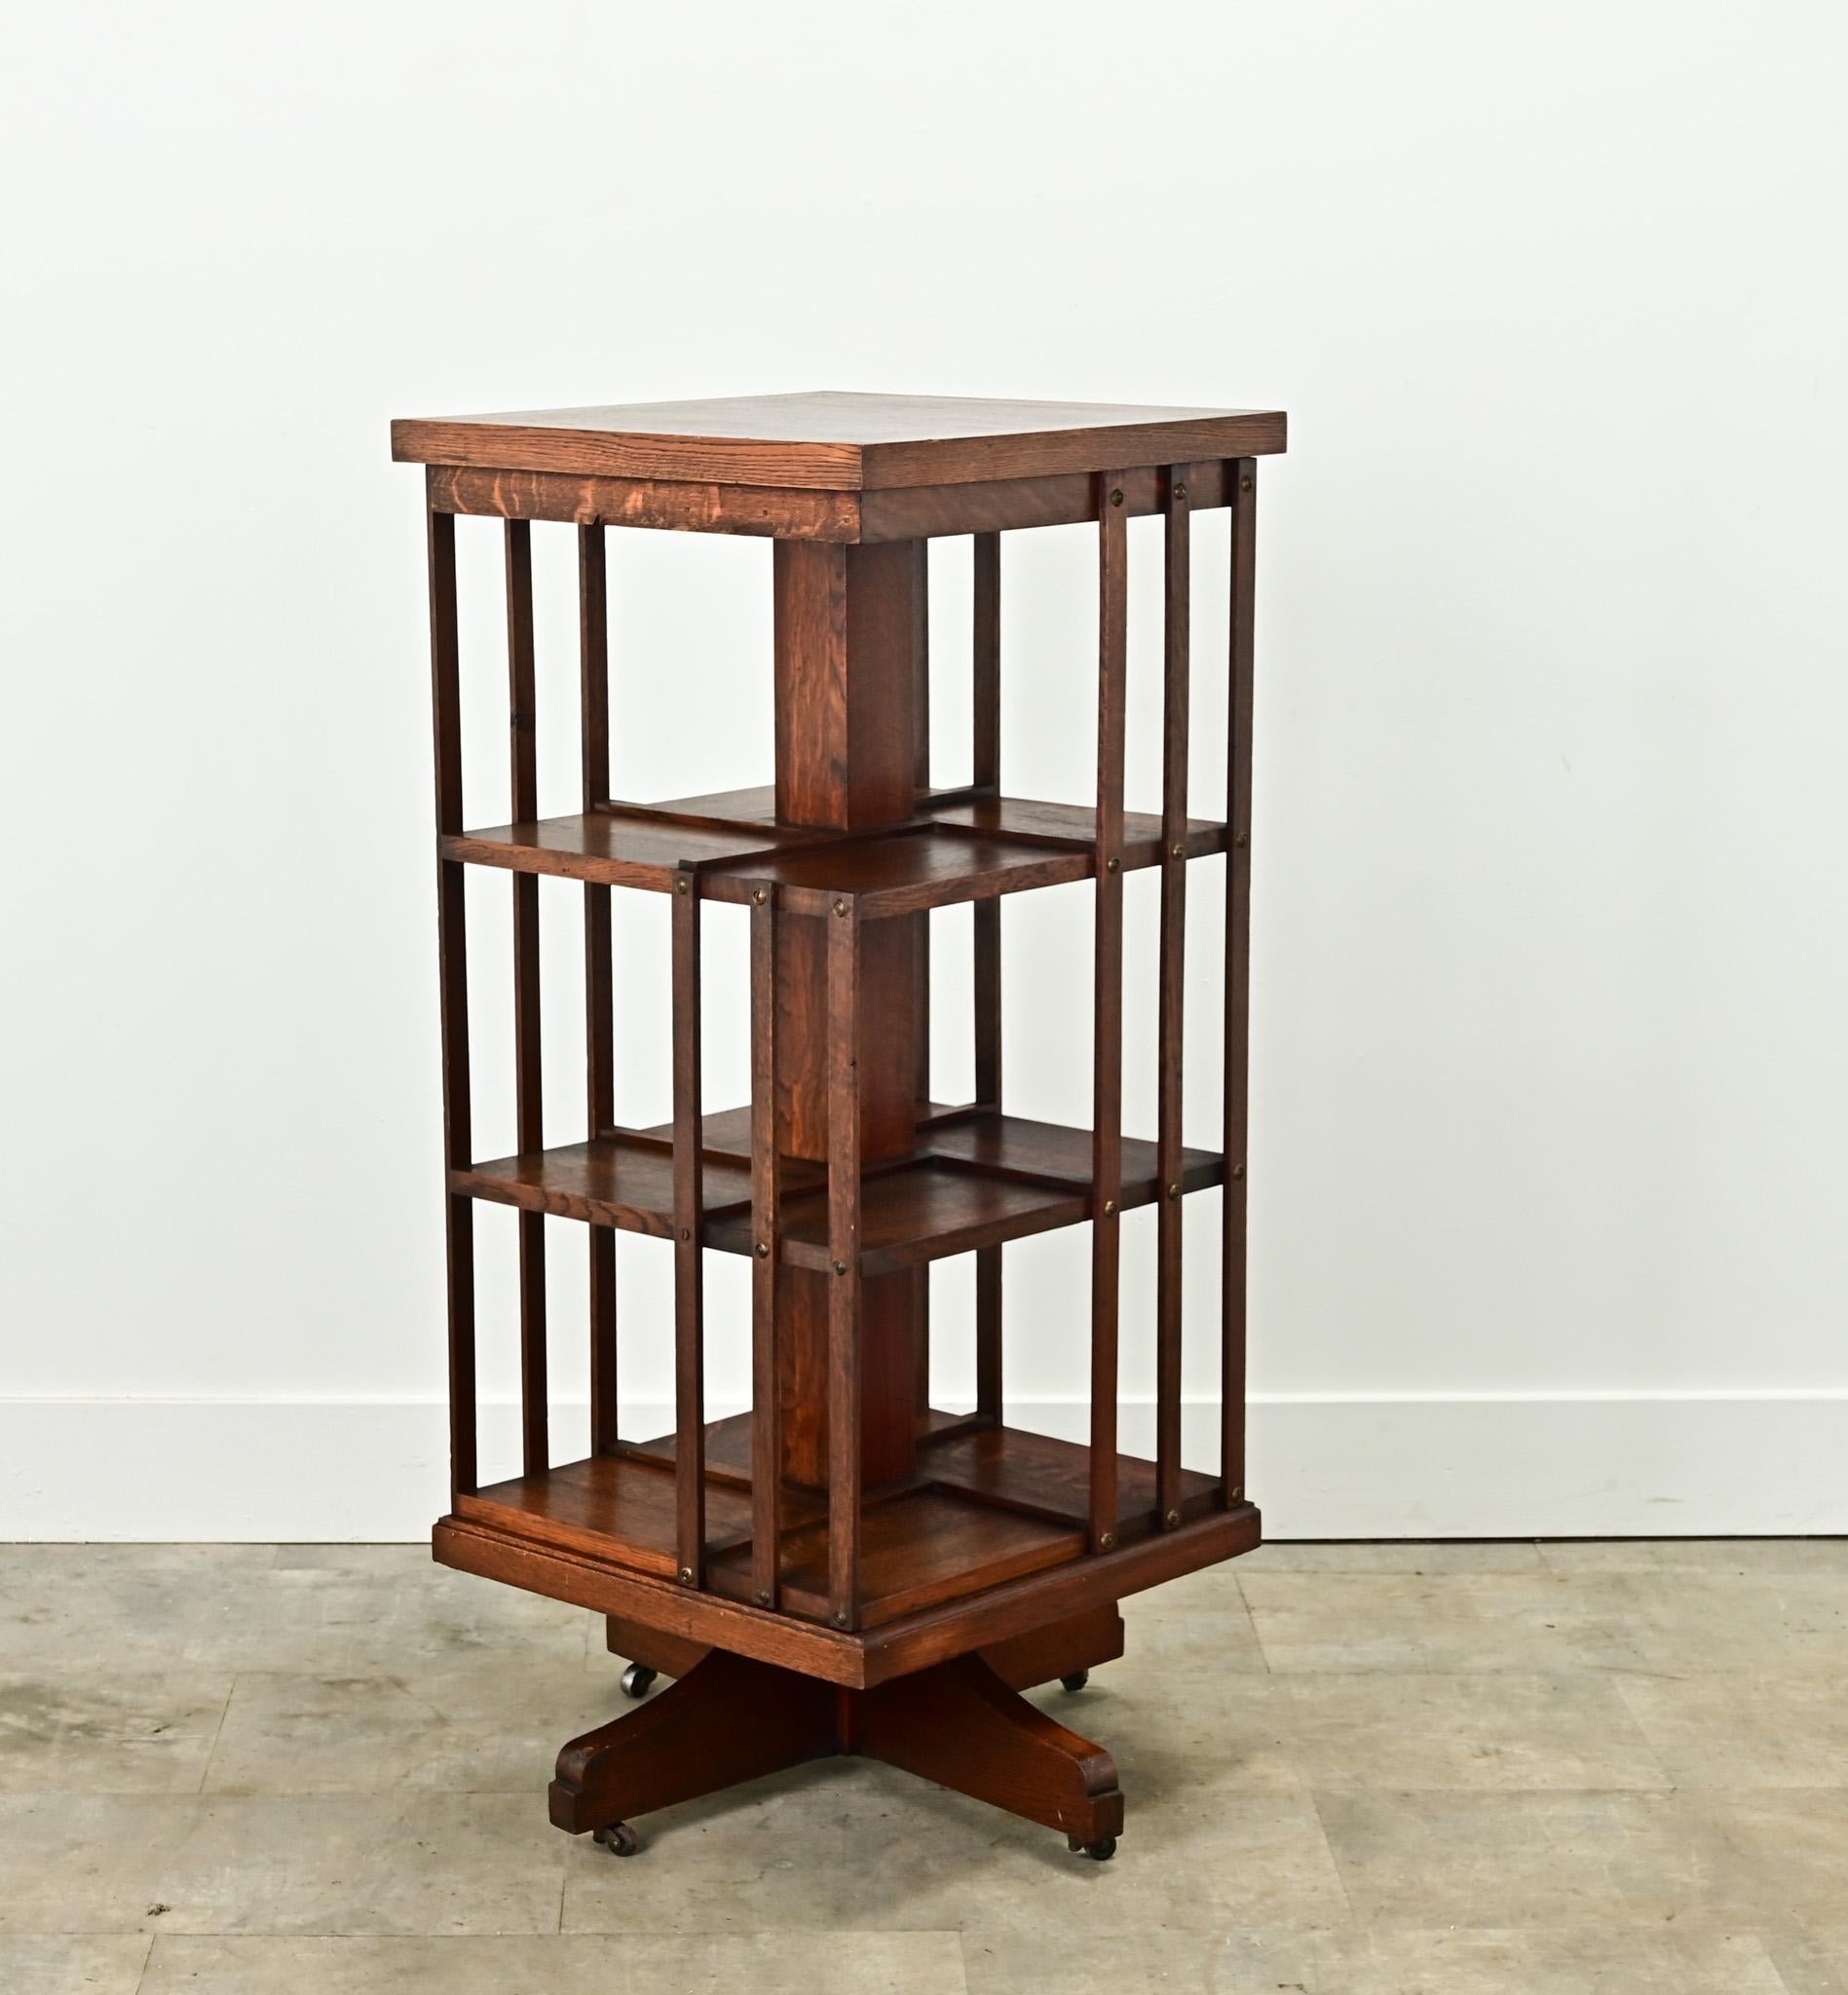 An English revolving bookcase is perfect for your interior. This oak bookcase has three sessions for books no more than 10” tall. The open cabinet sits over a four leg base lifted on casters. Cleaned and polished with a paste wax this interesting